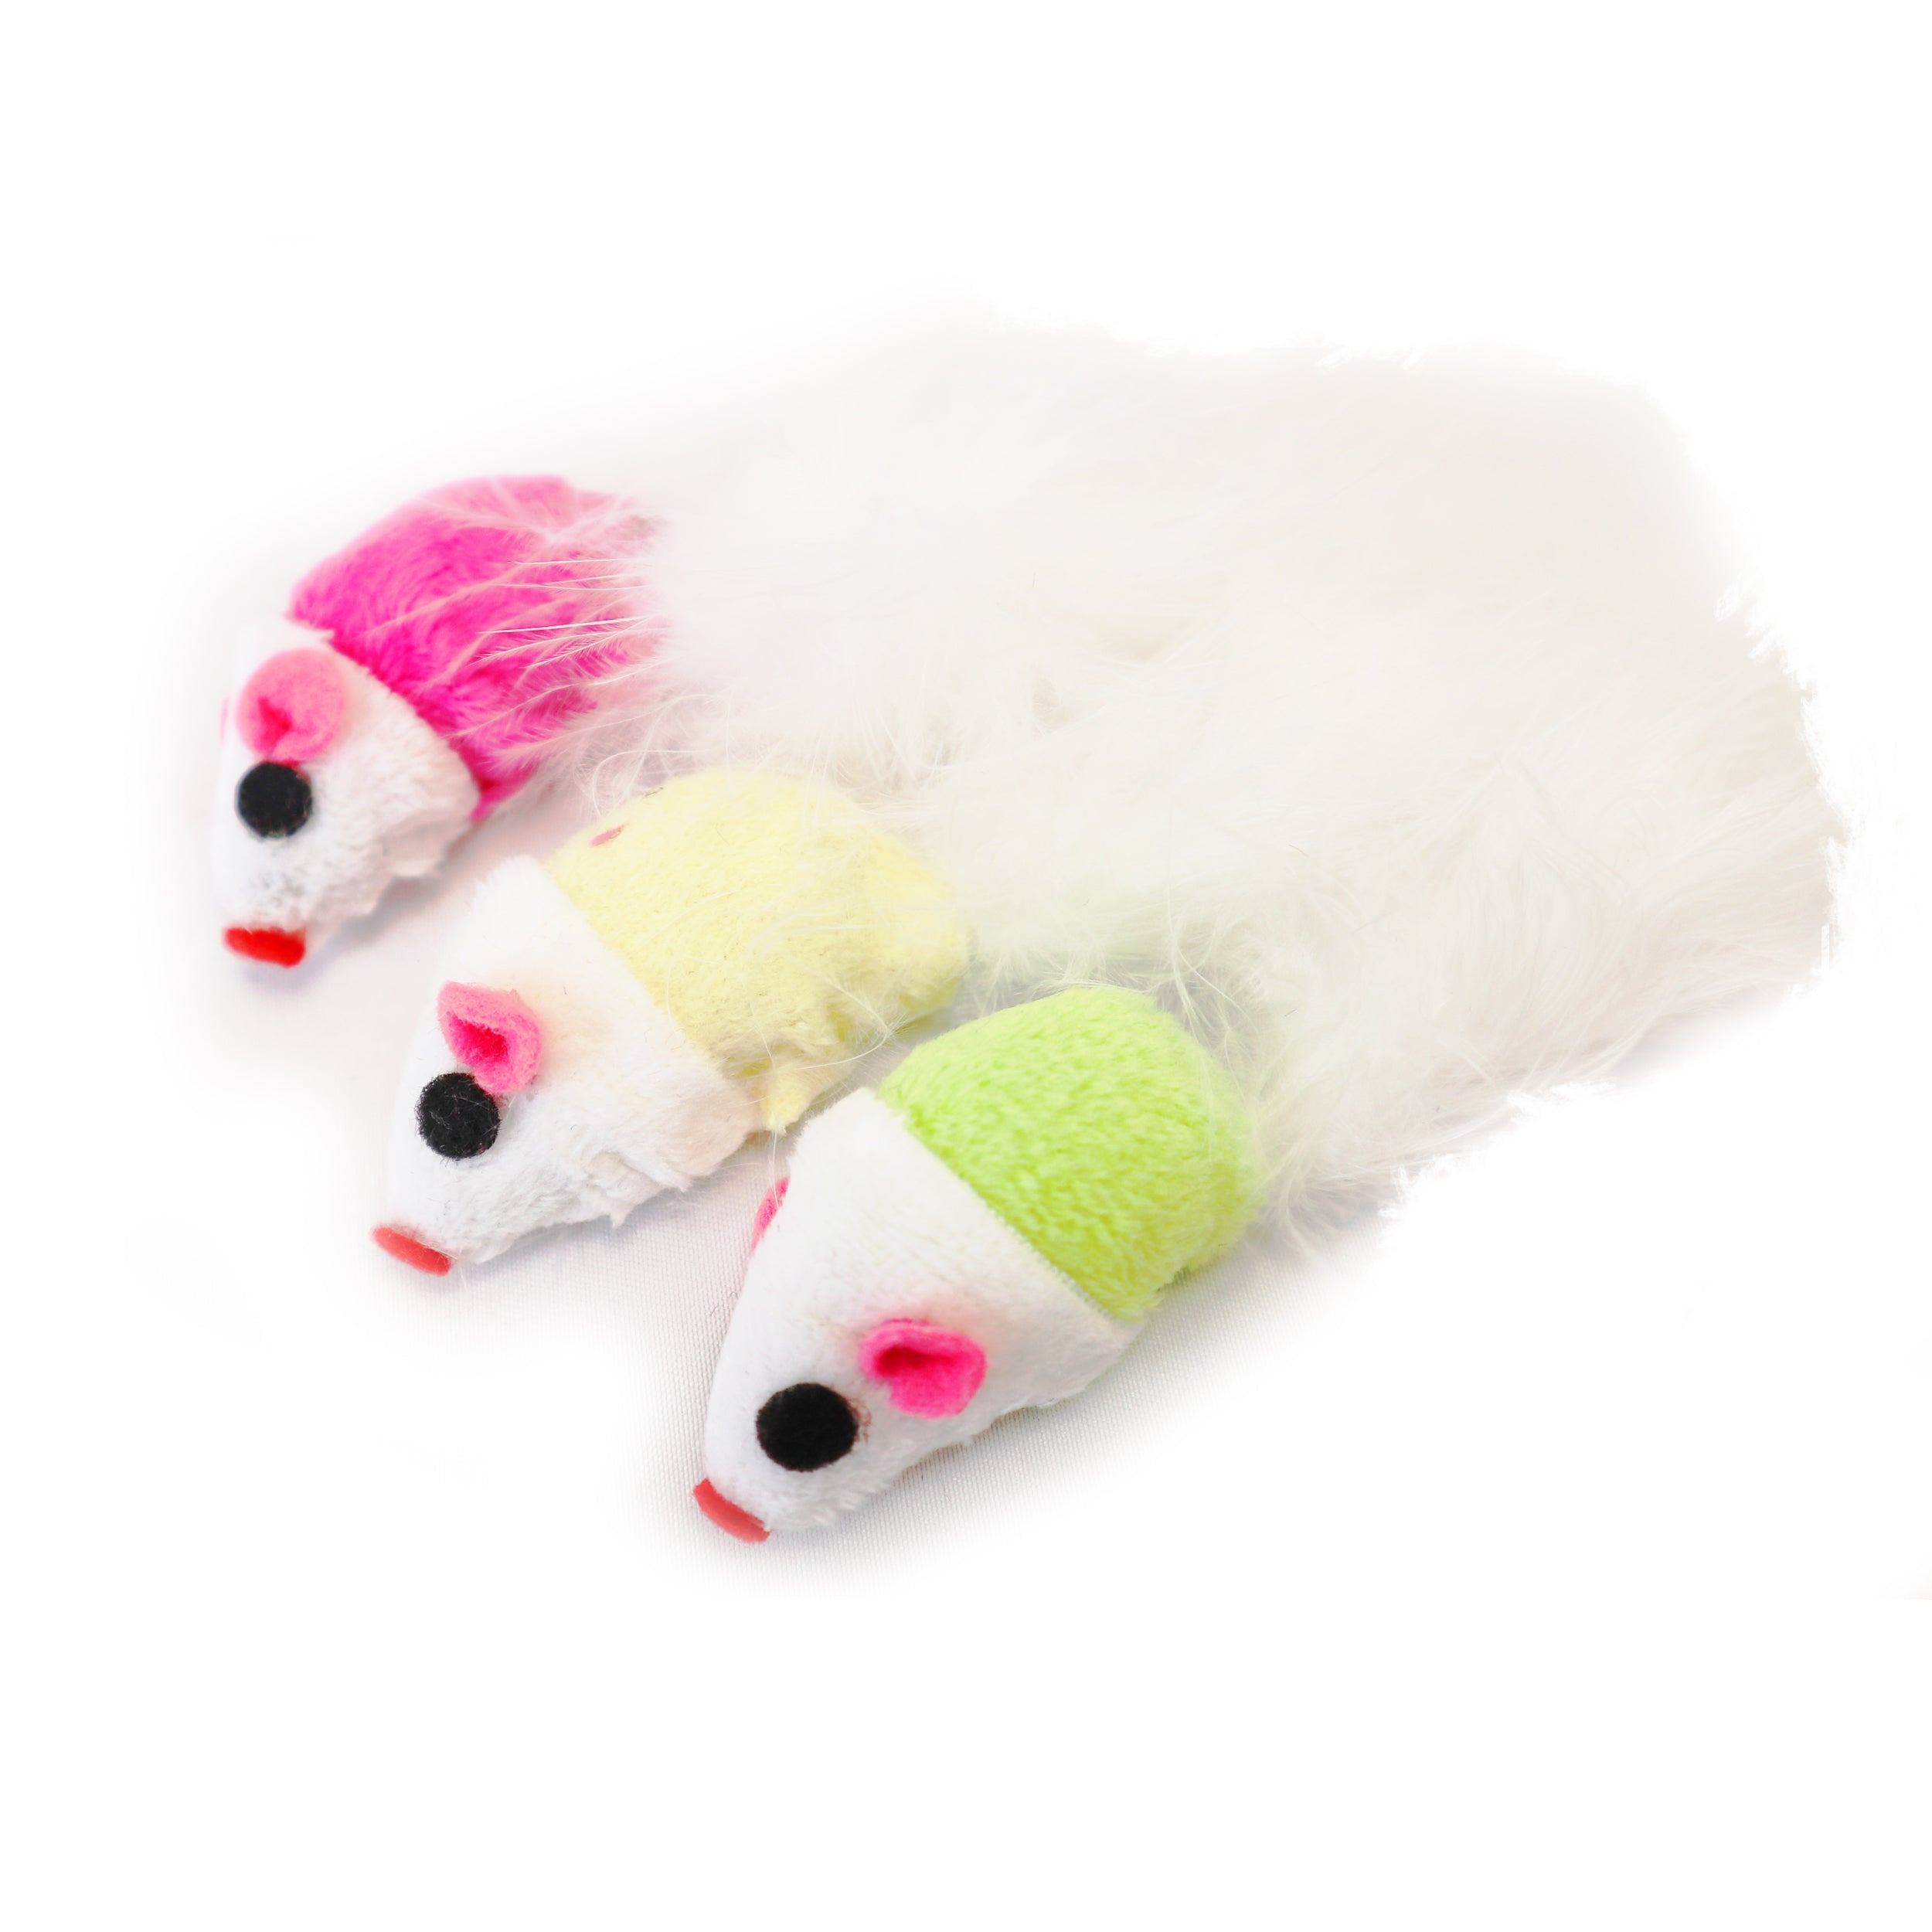 One pack 3 piece cat toy in a row includes one pick, yellow, and green mouse with fluffy tails to entertain and attract cat or kitten toy